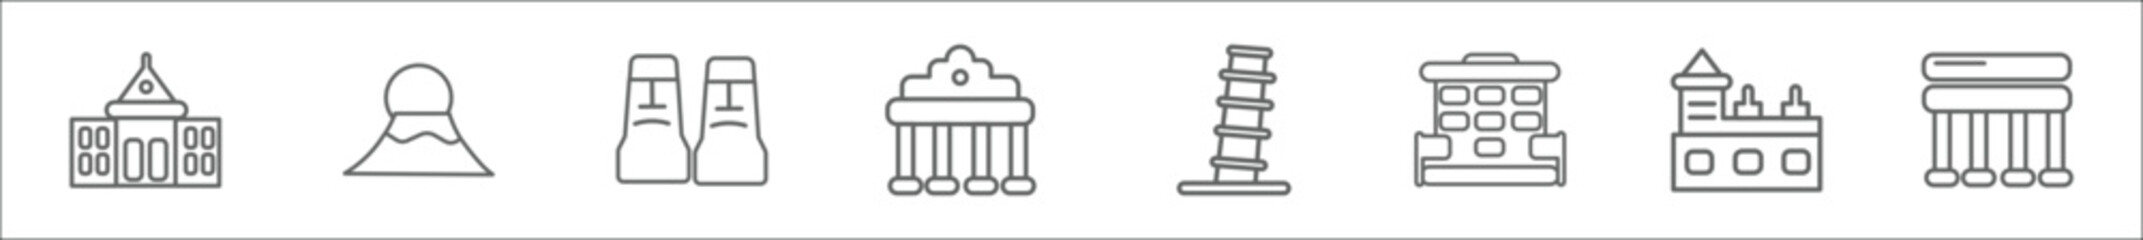 outline set of buildings line icons. linear vector icons such as embassy, fuji mountain, rapa nui, brandenburg gate, pisa tower, uno building, charles bridge, greece